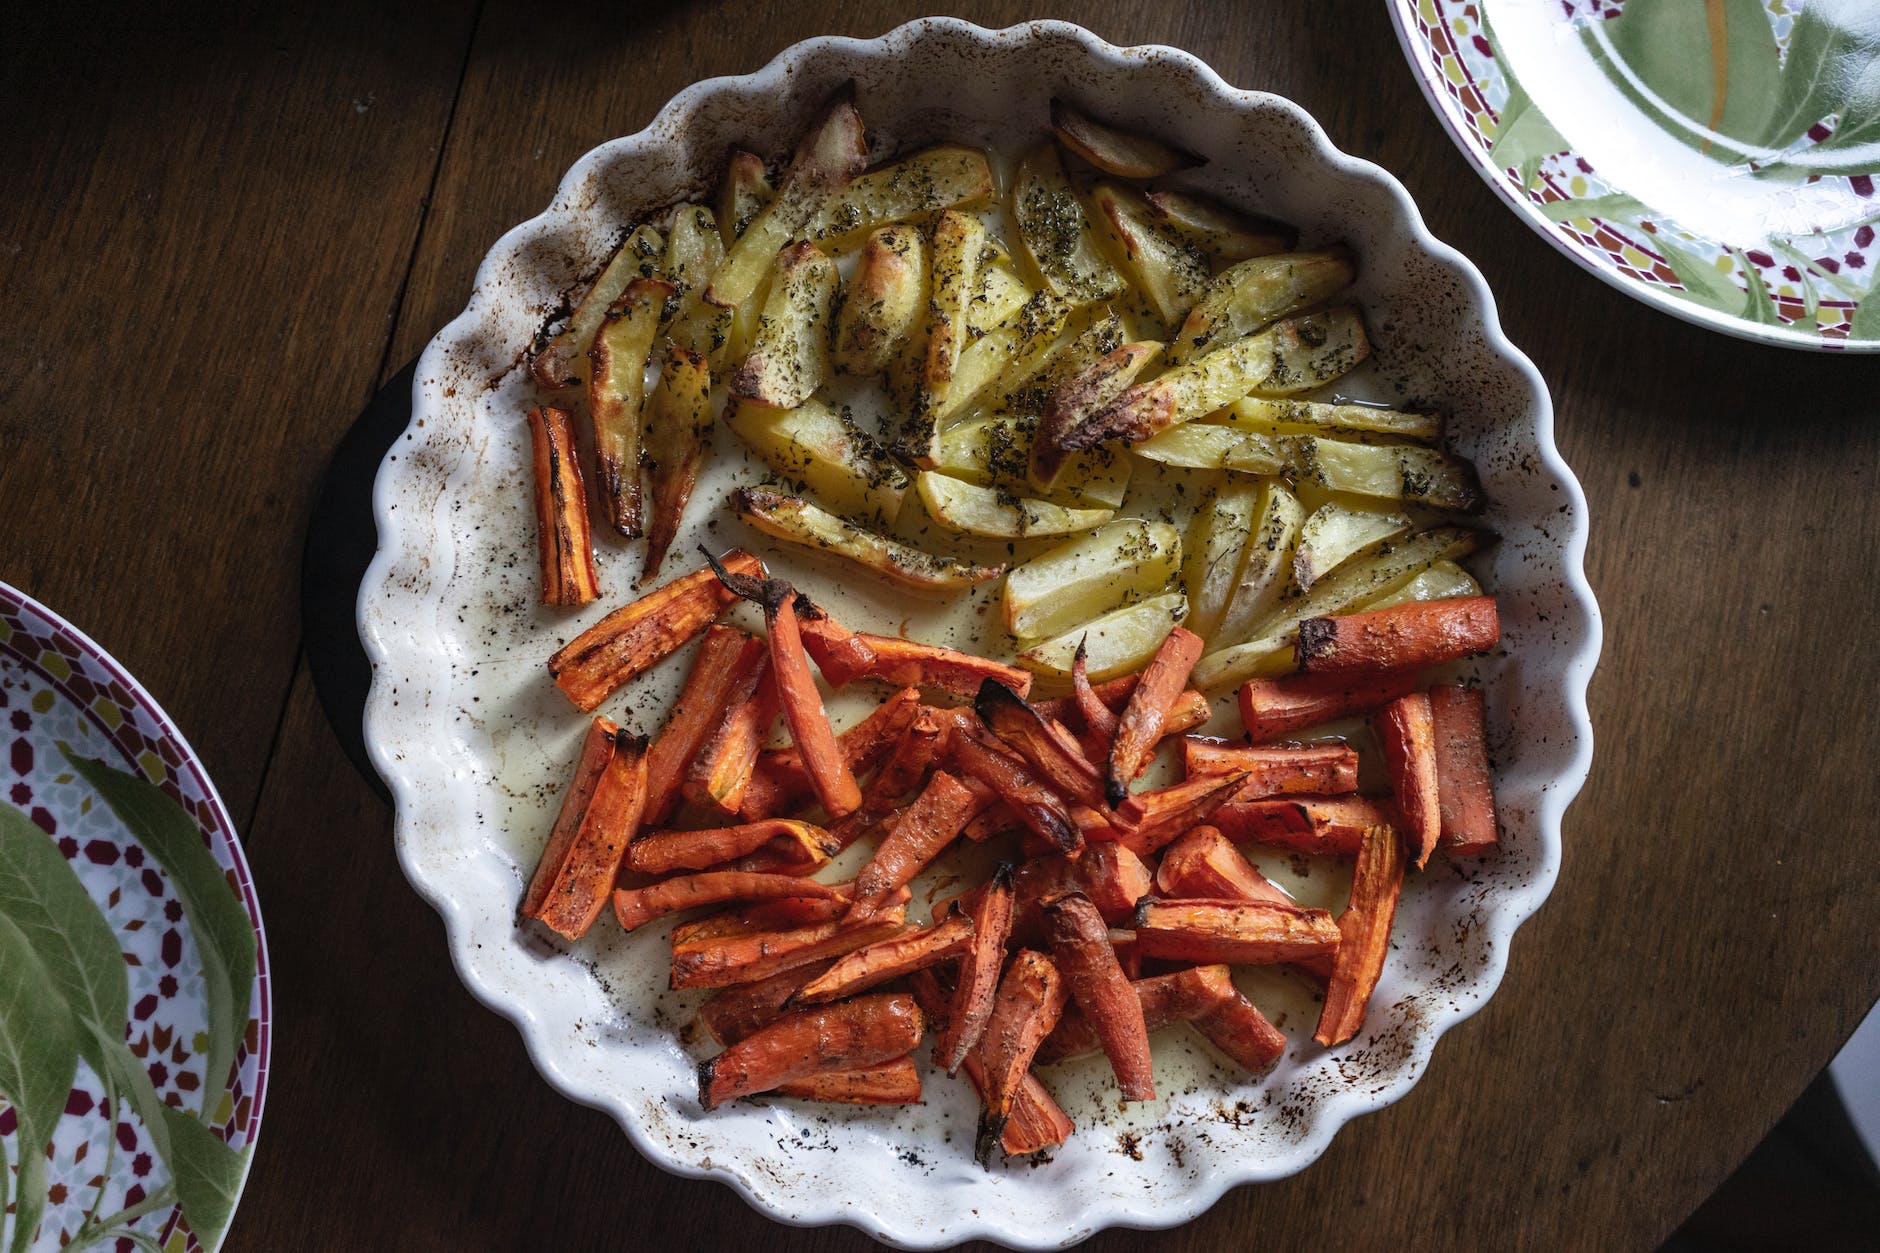 plate with fried potato and carrot